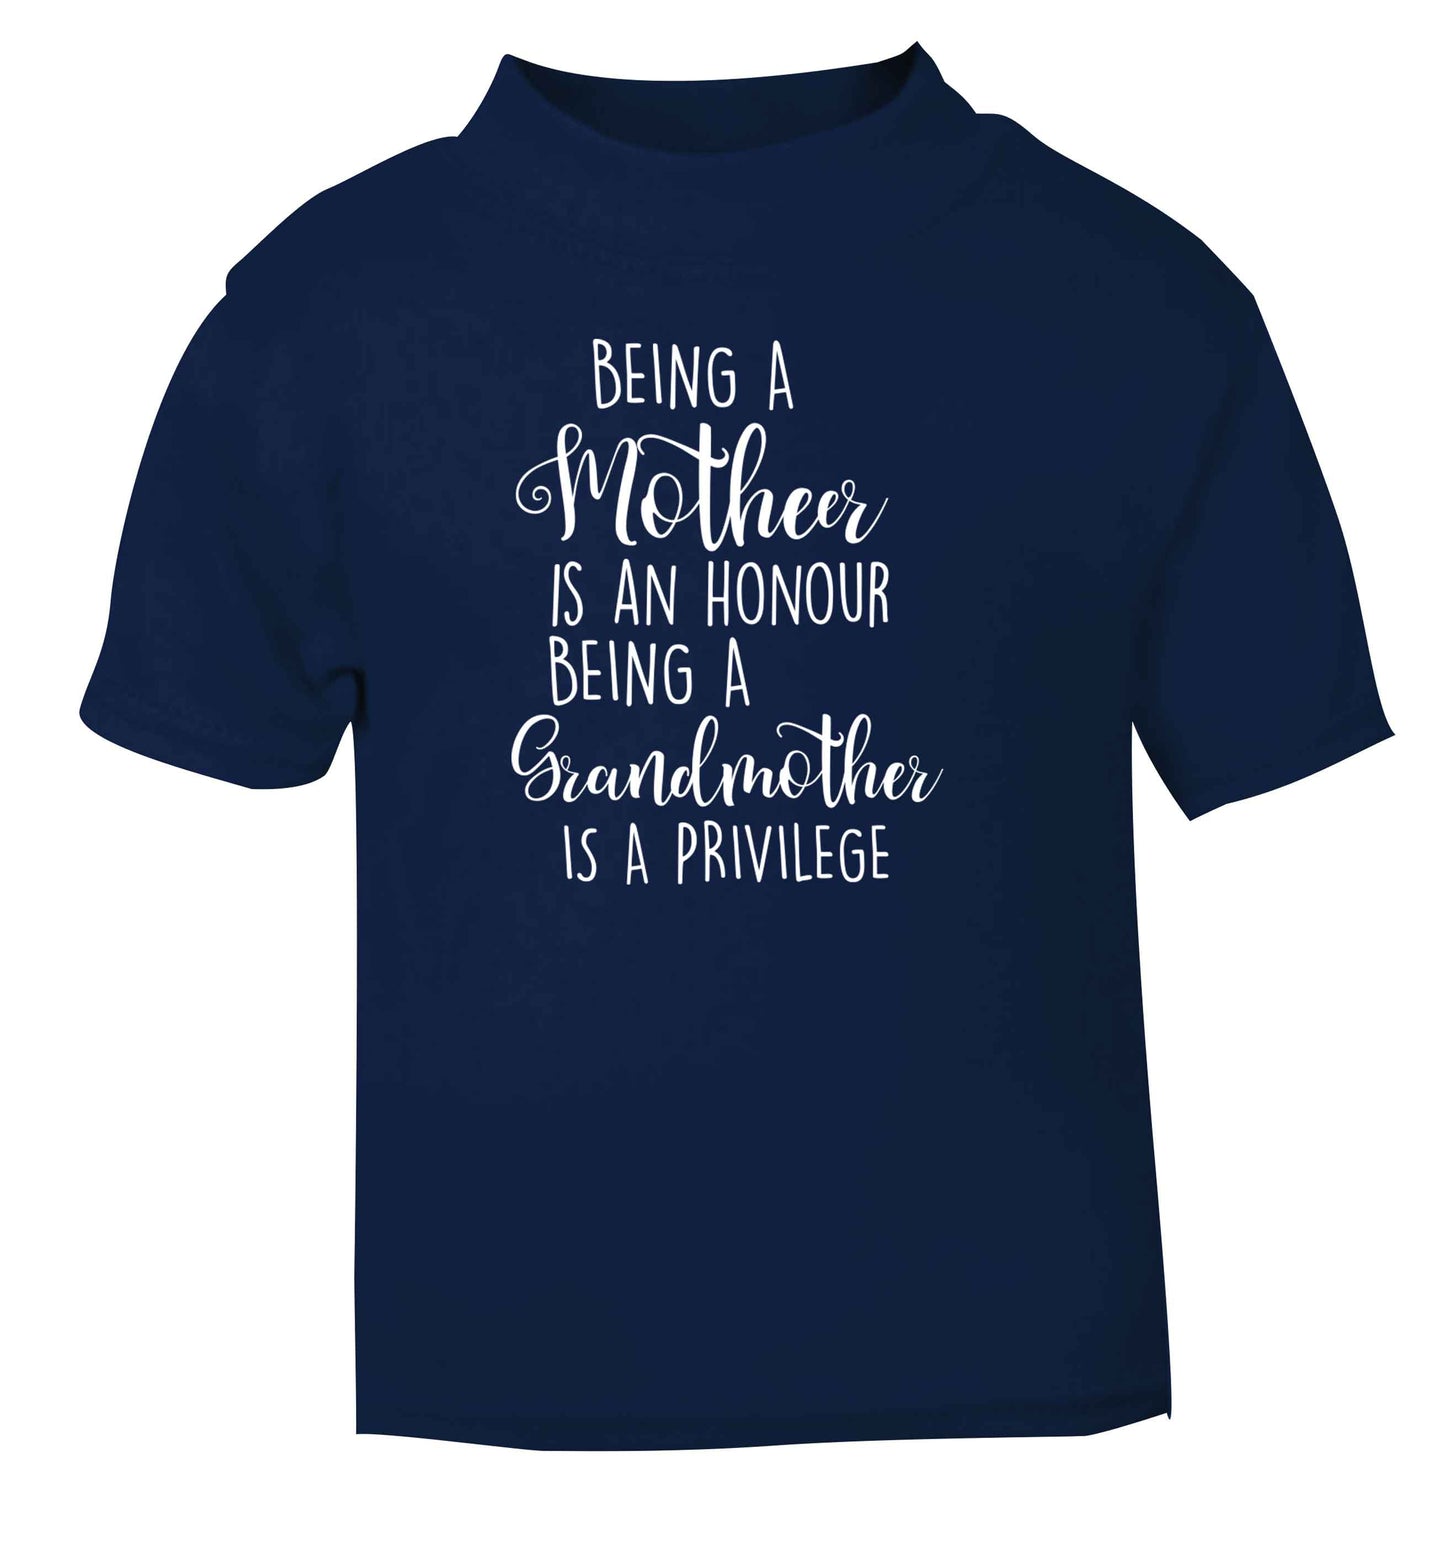 Being a mother is an honour being an grandmother is a privilege navy Baby Toddler Tshirt 2 Years